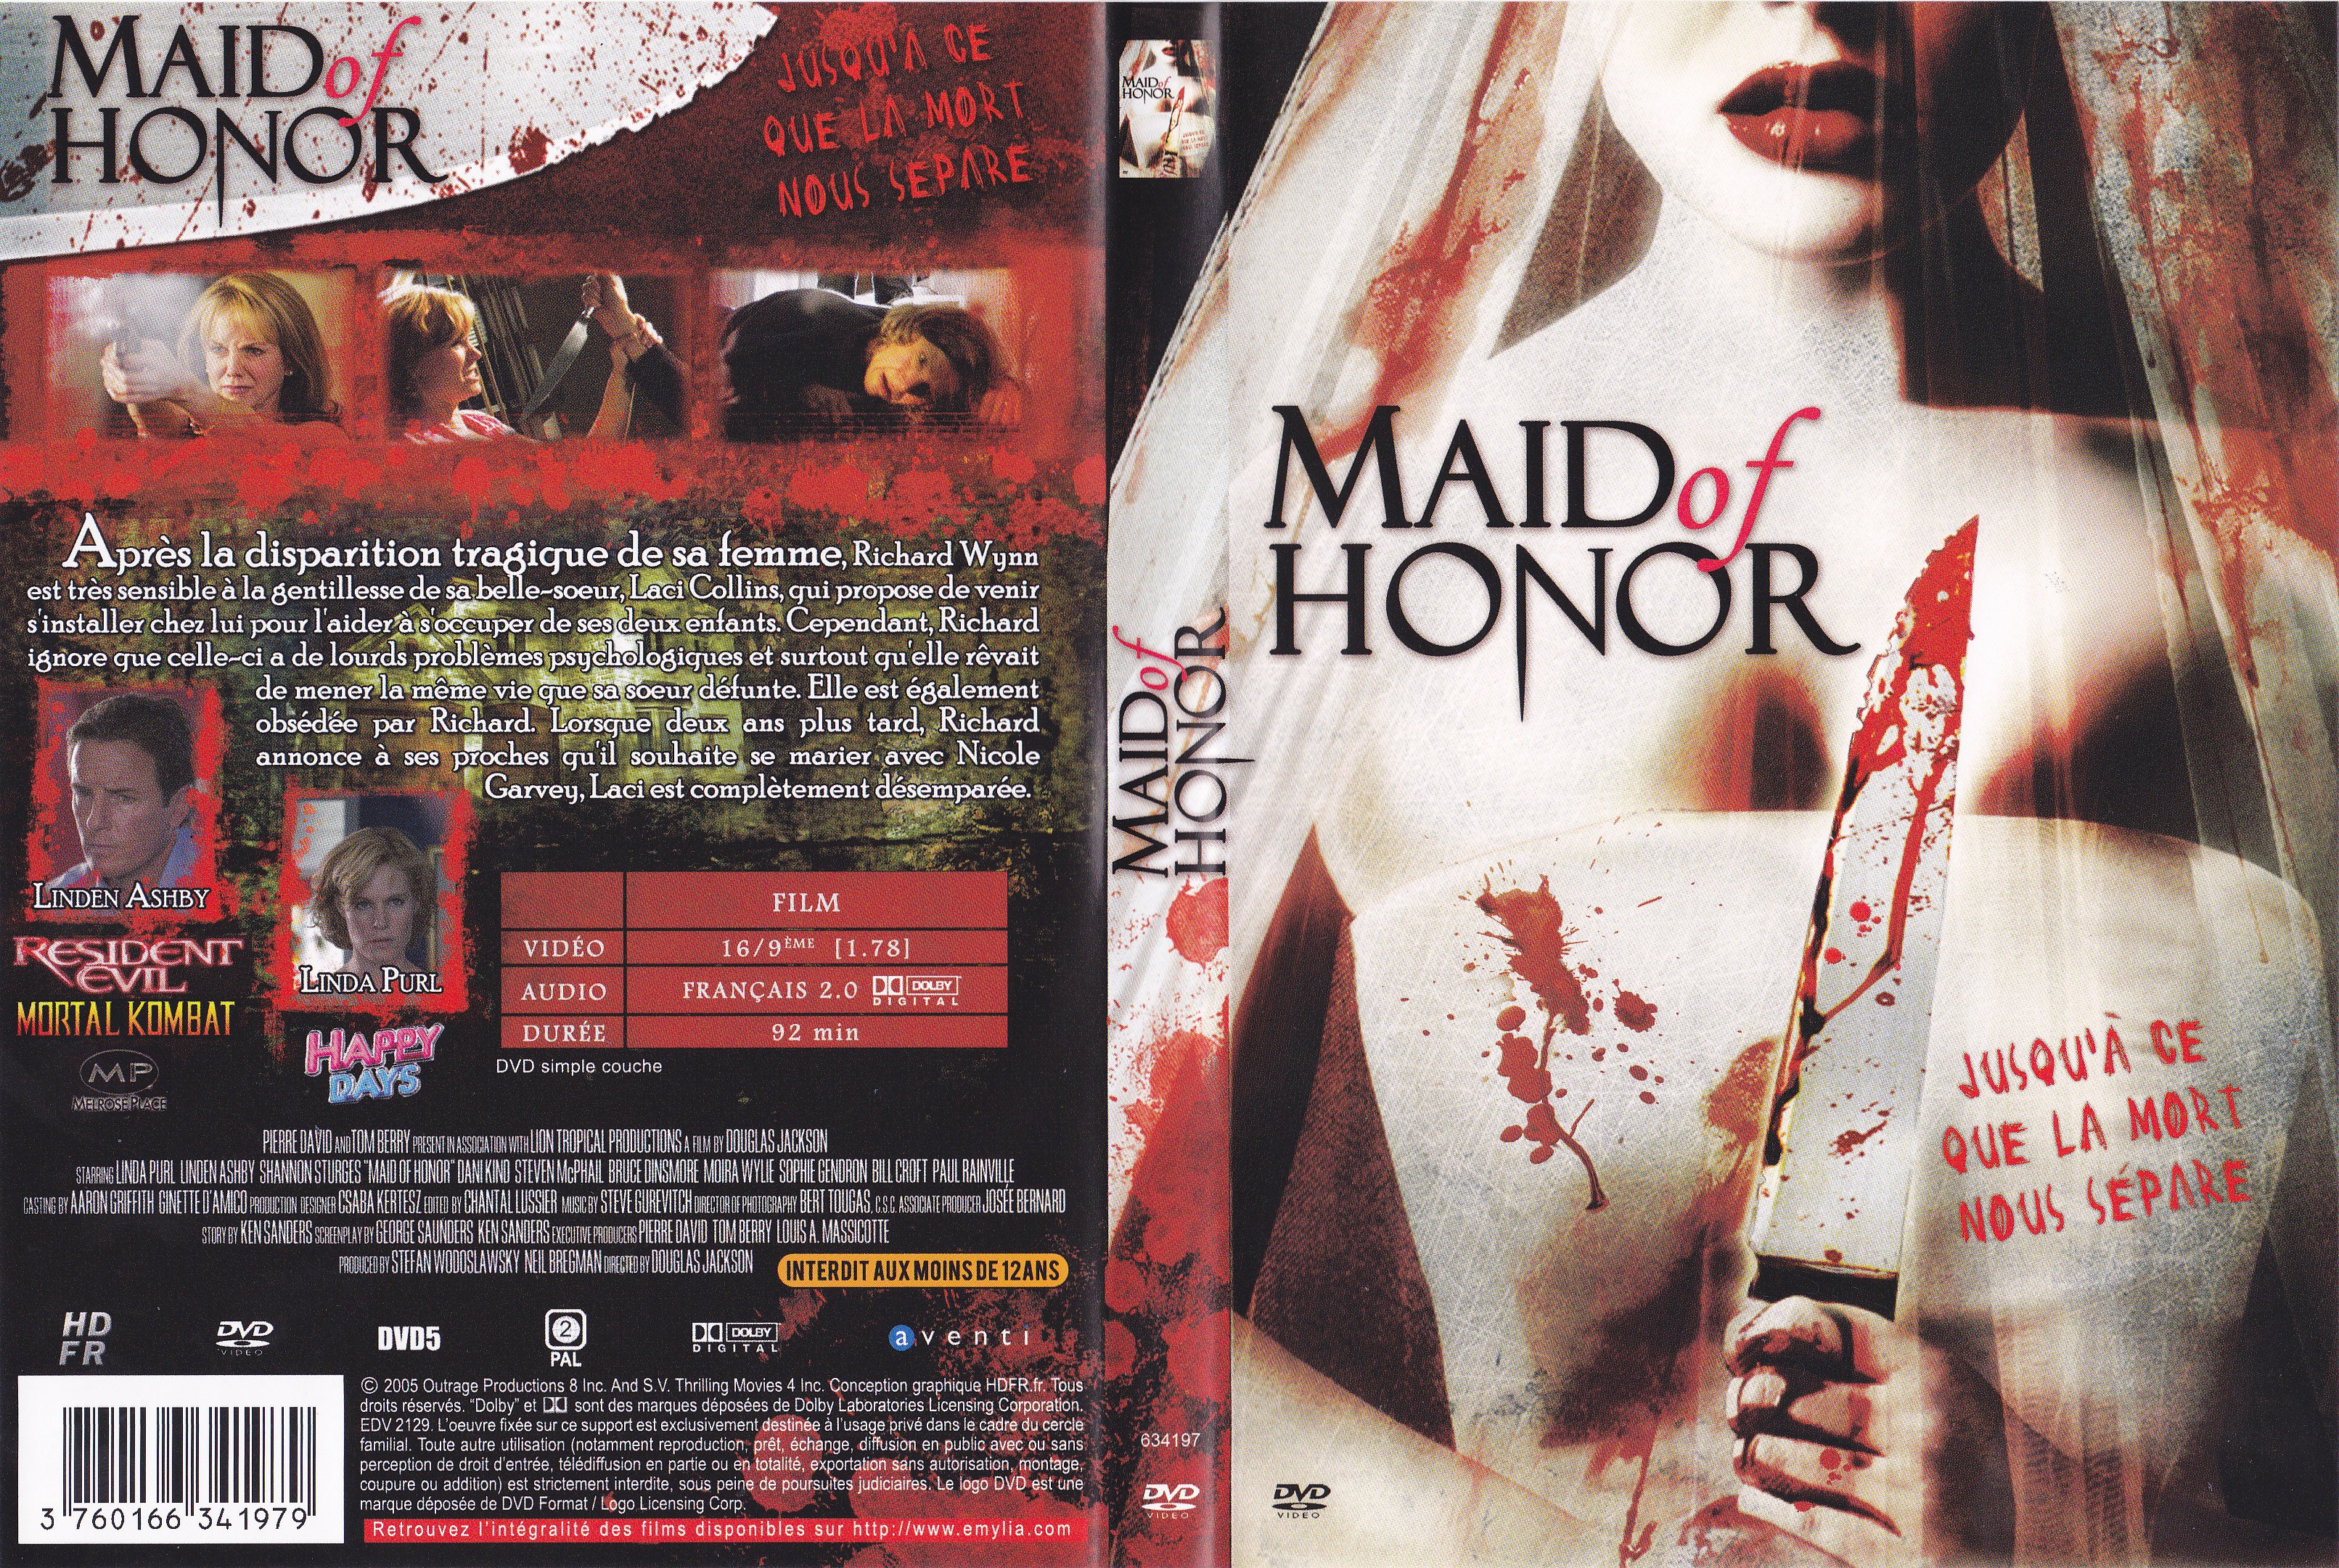 Jaquette DVD Maid of Honor